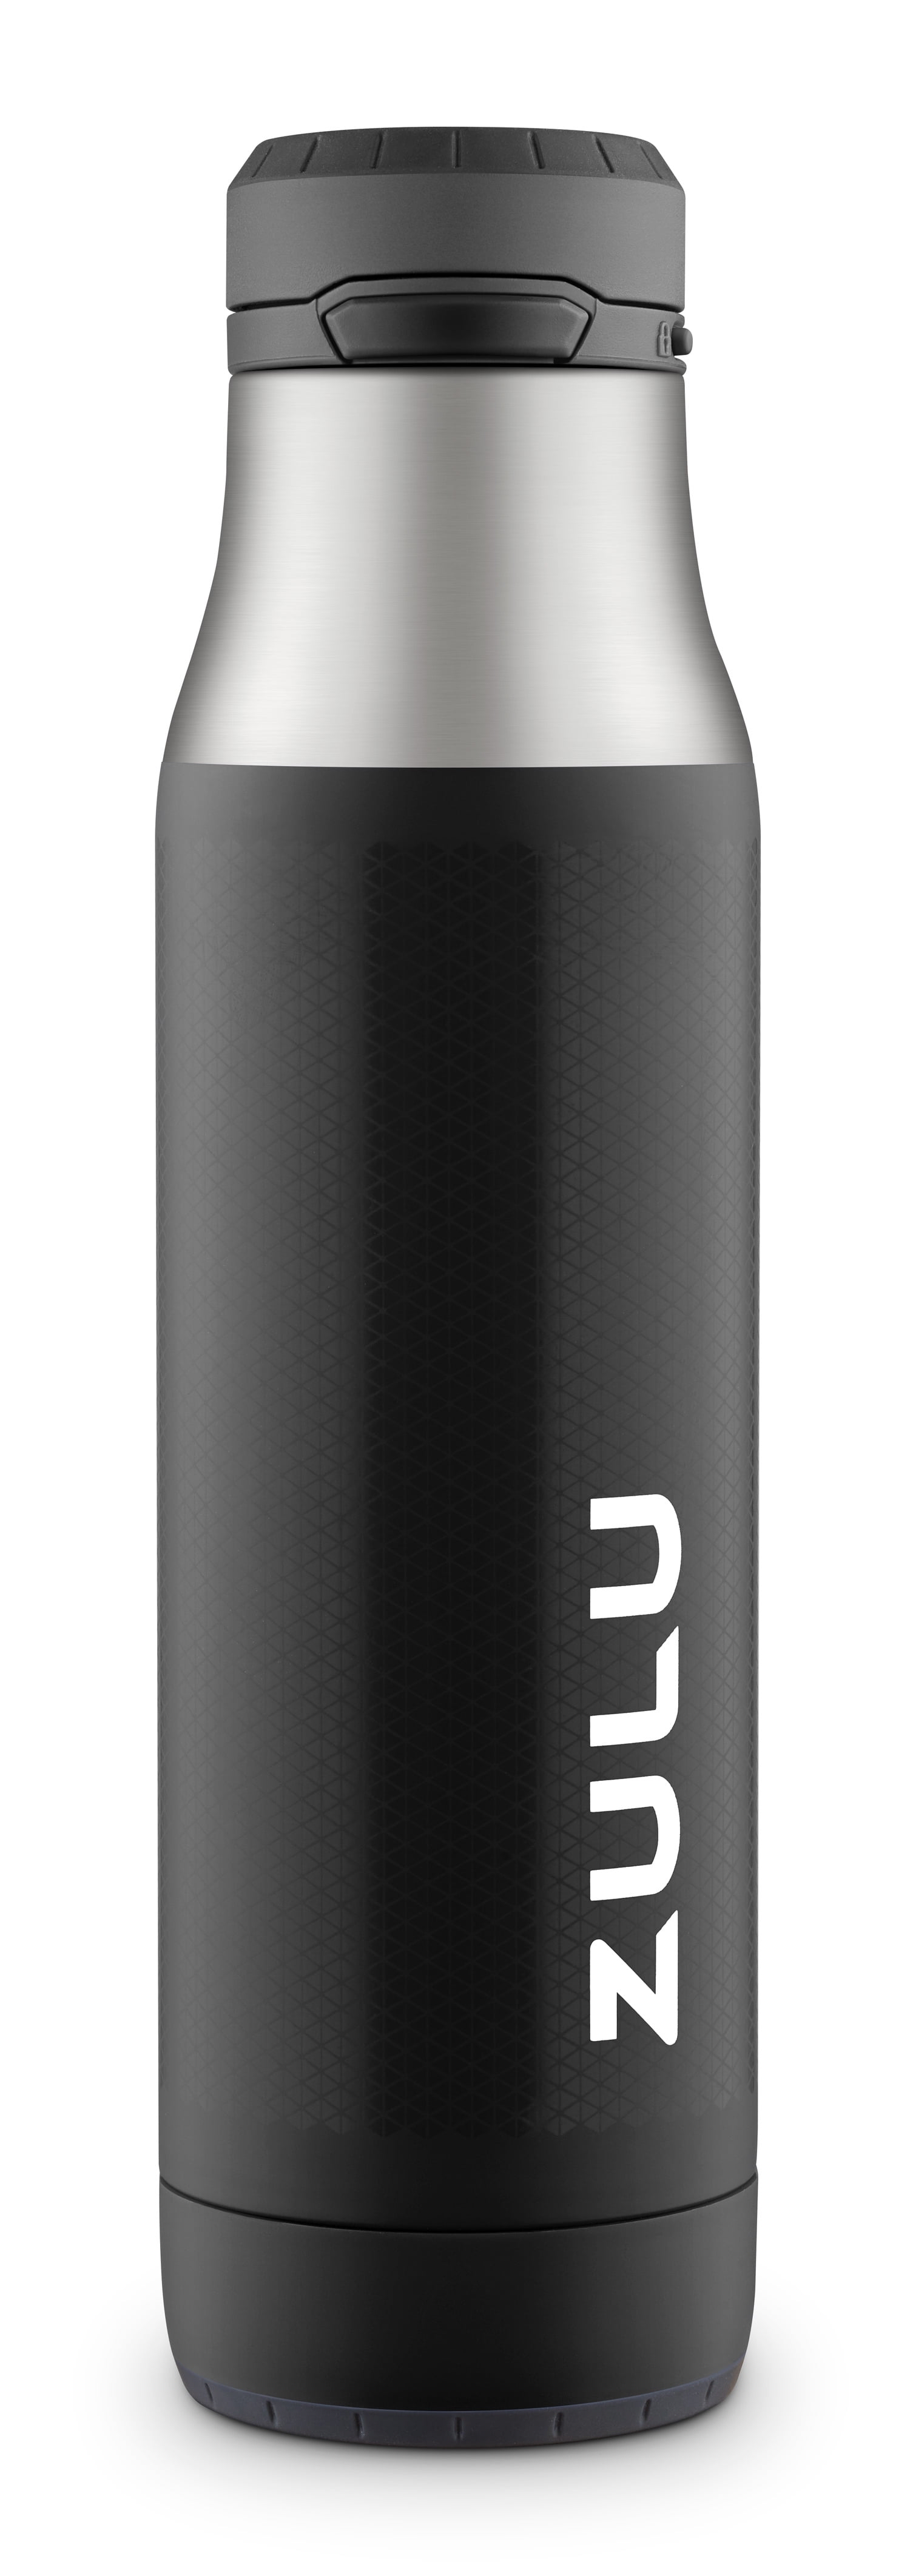 Zulu Ace Vacuum Insulated Stainless Steel Water Bottle with Removable Zulu Stainless Steel Water Bottle